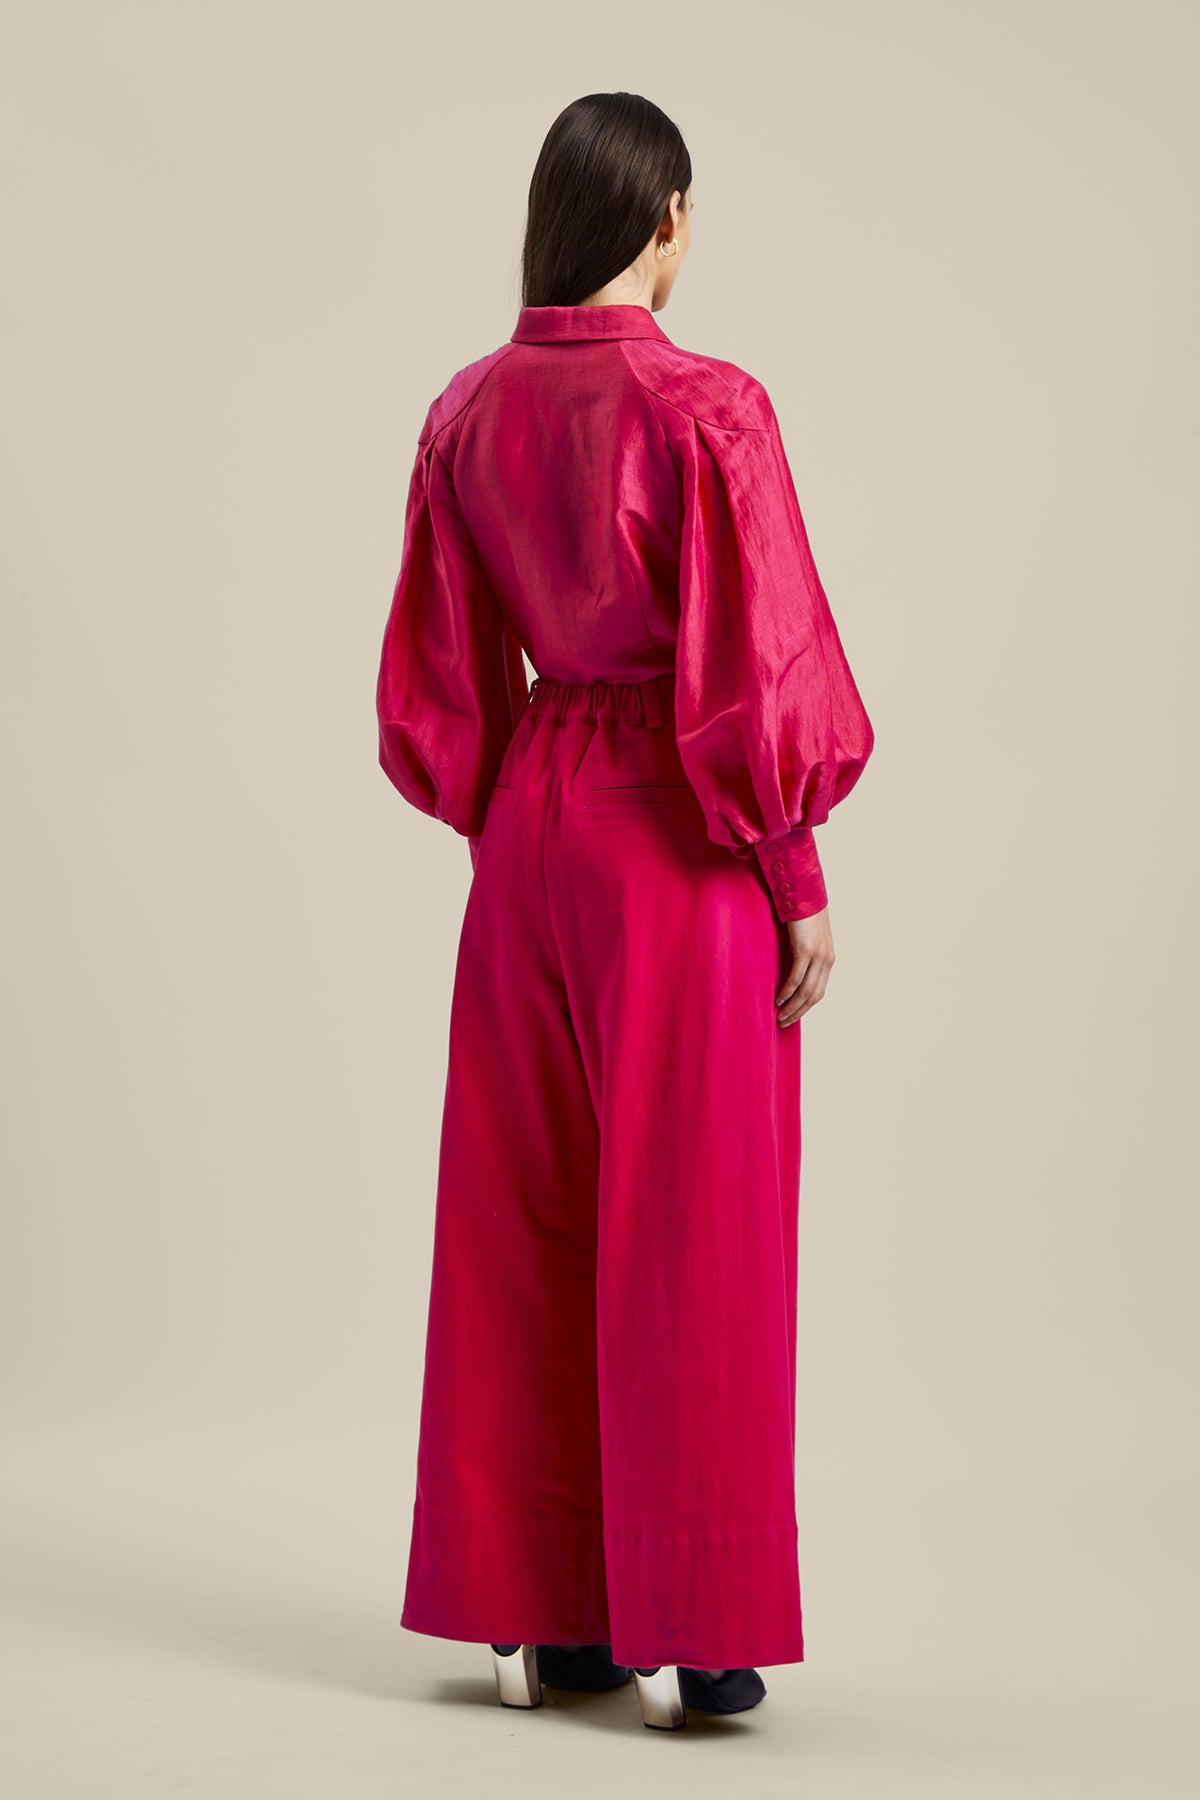 Back view of model wearing the Novelist Pant from Australian women’s designer GINGER & SMART featuring a wide leg and sharp tailoring. Worn with a pink blouse.